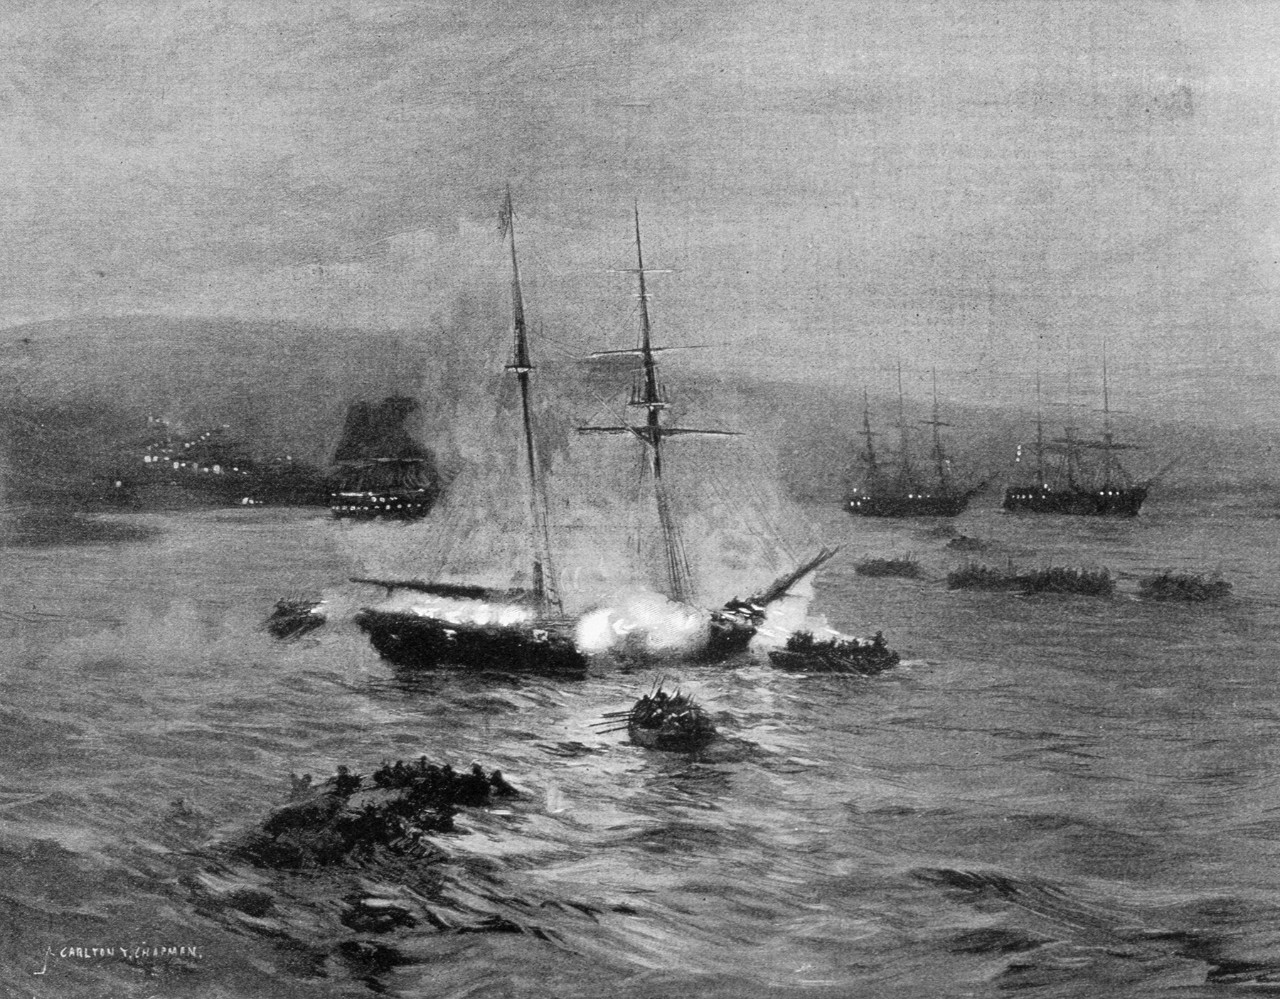 A ship is sinking with its deck on fire. The ship is surrounded by boats in the background are two large ships.